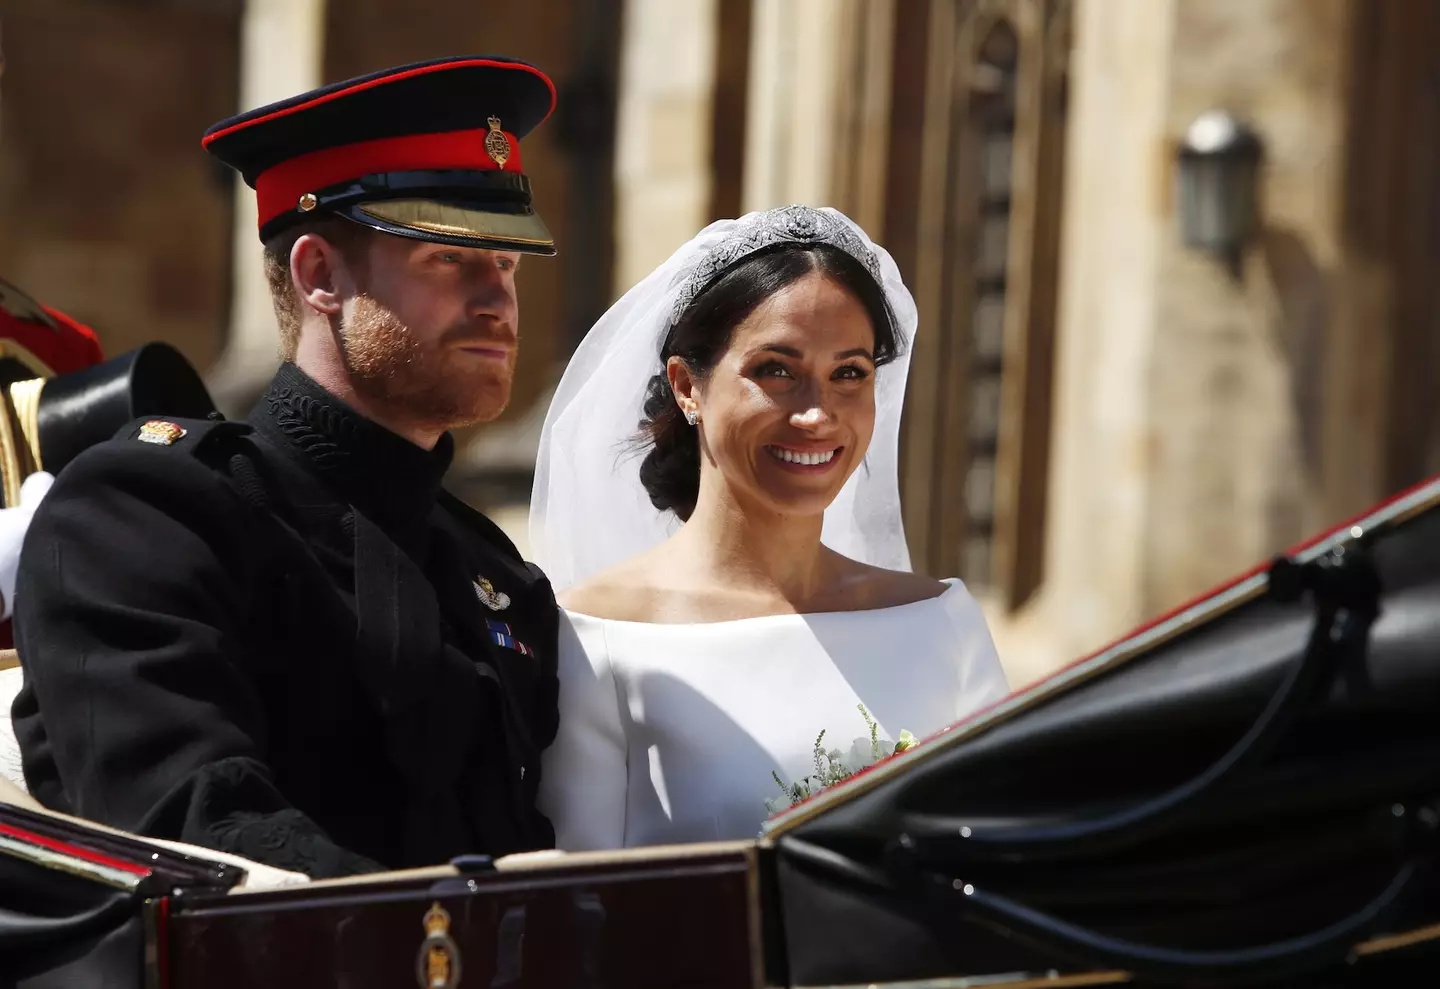 The episode aired six years before she became the Duchess of Sussex (